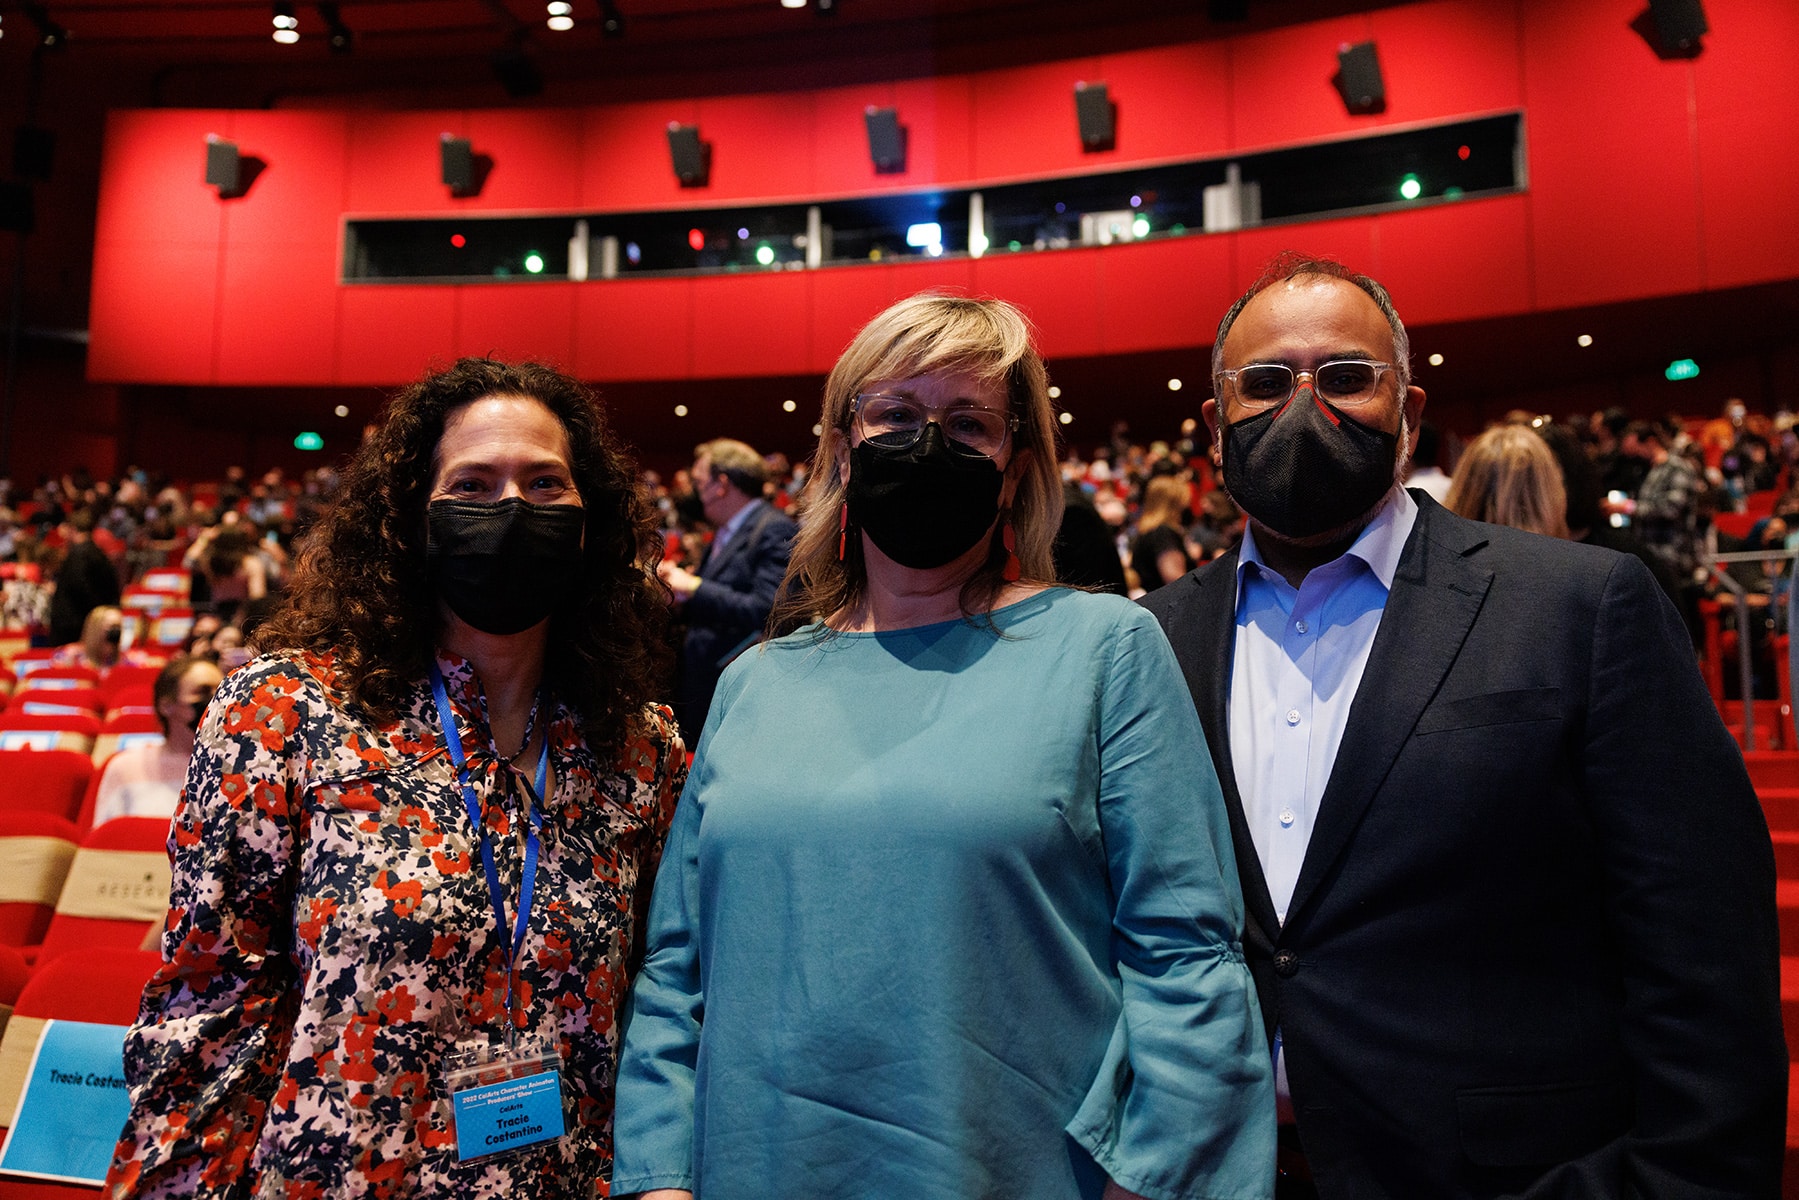 The three, wearing masks, stand side by side in the theater.